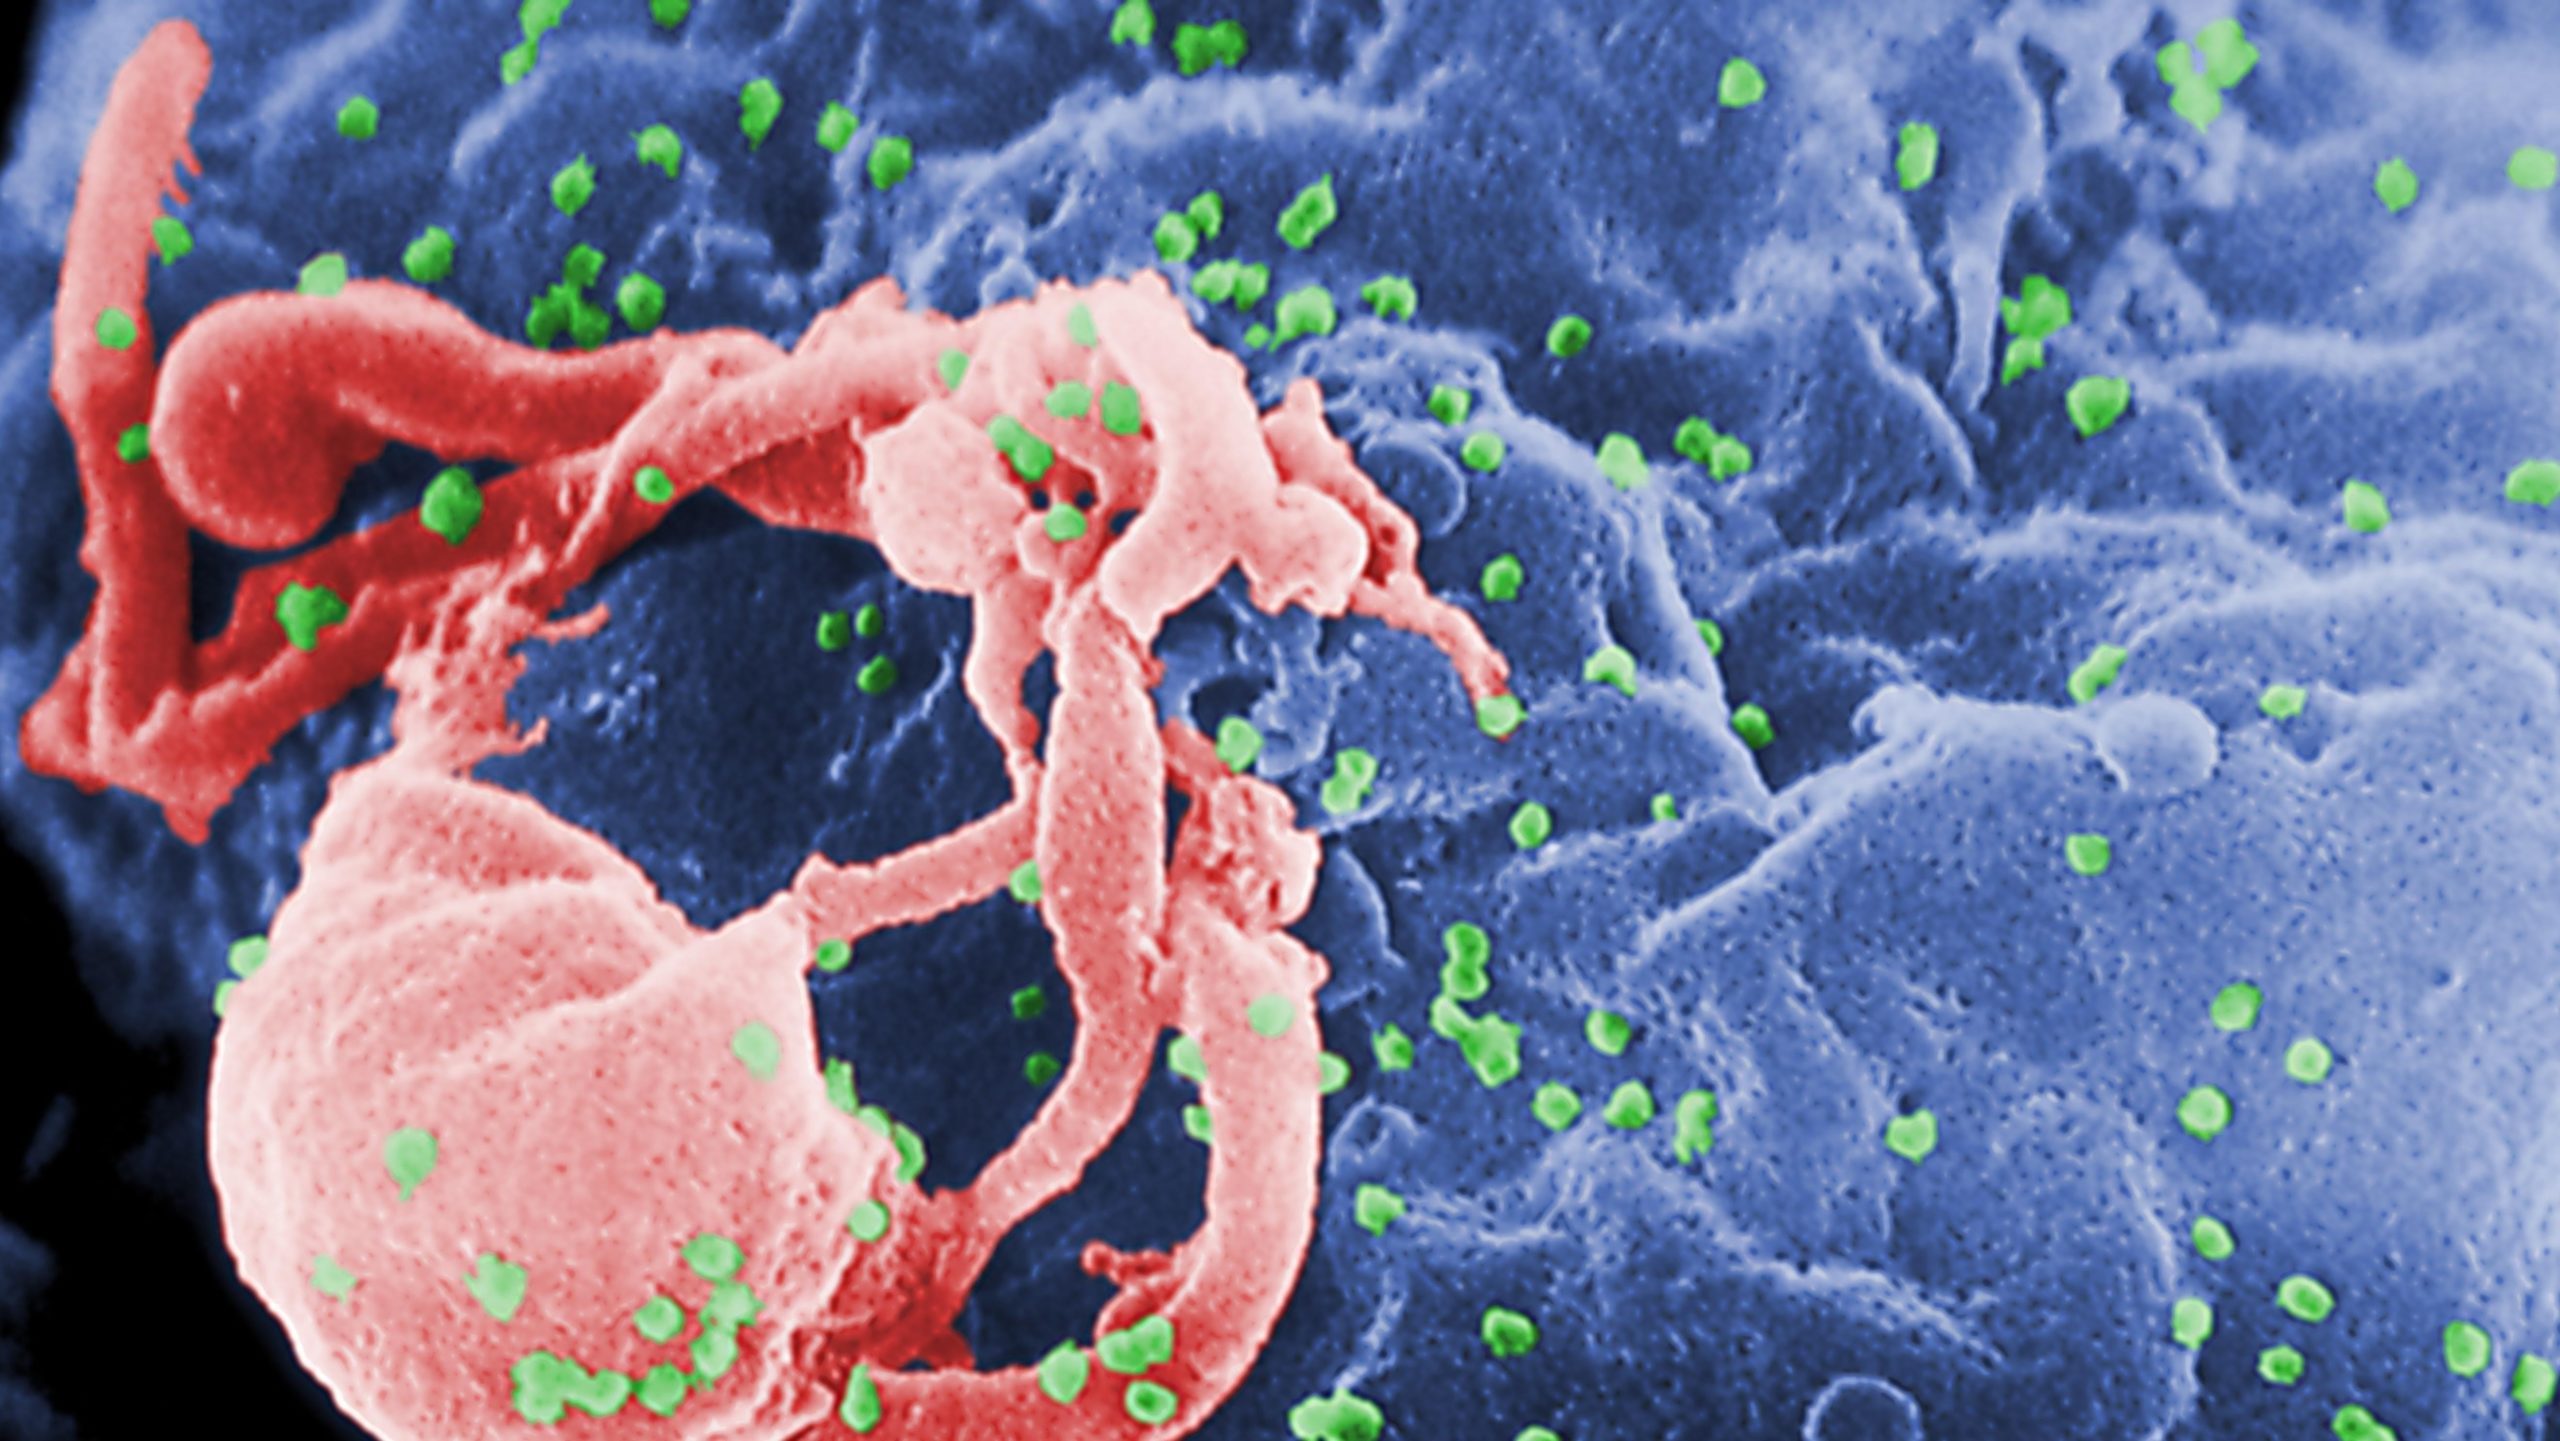 A scanning electron micrograph (SEM) of HIV-1 virions as green round bumps (Image: Smith Collection/Gado,   (Getty Images))